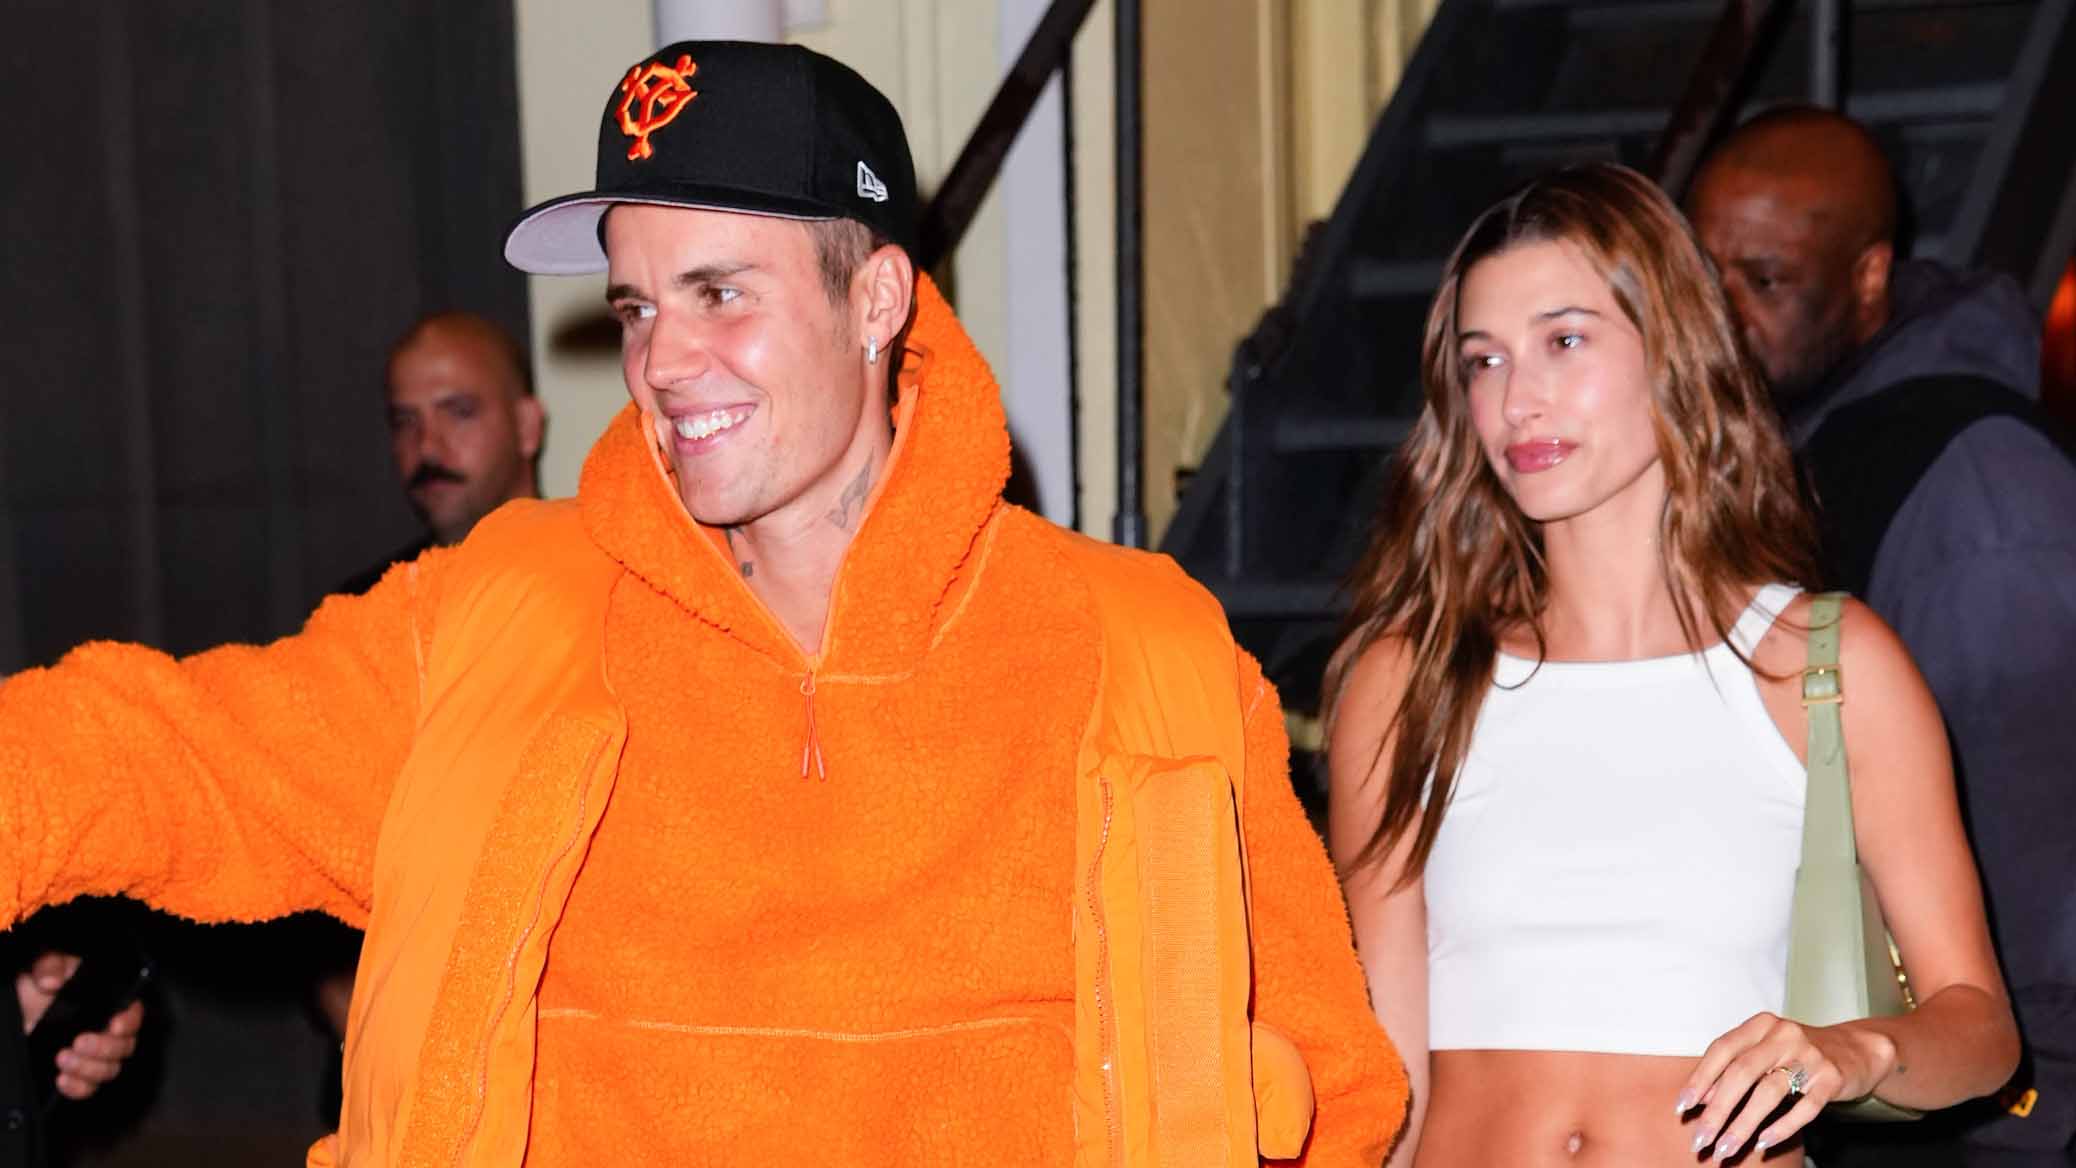 Hailey Bieber Thinks She Is The Muse Of Her Husband Justin Bieber's Albums,  But Does He Think So? An Old Video Resurfaces When He Claimed His Ex-GF  (Selena Gomez) Was His Inspiration!